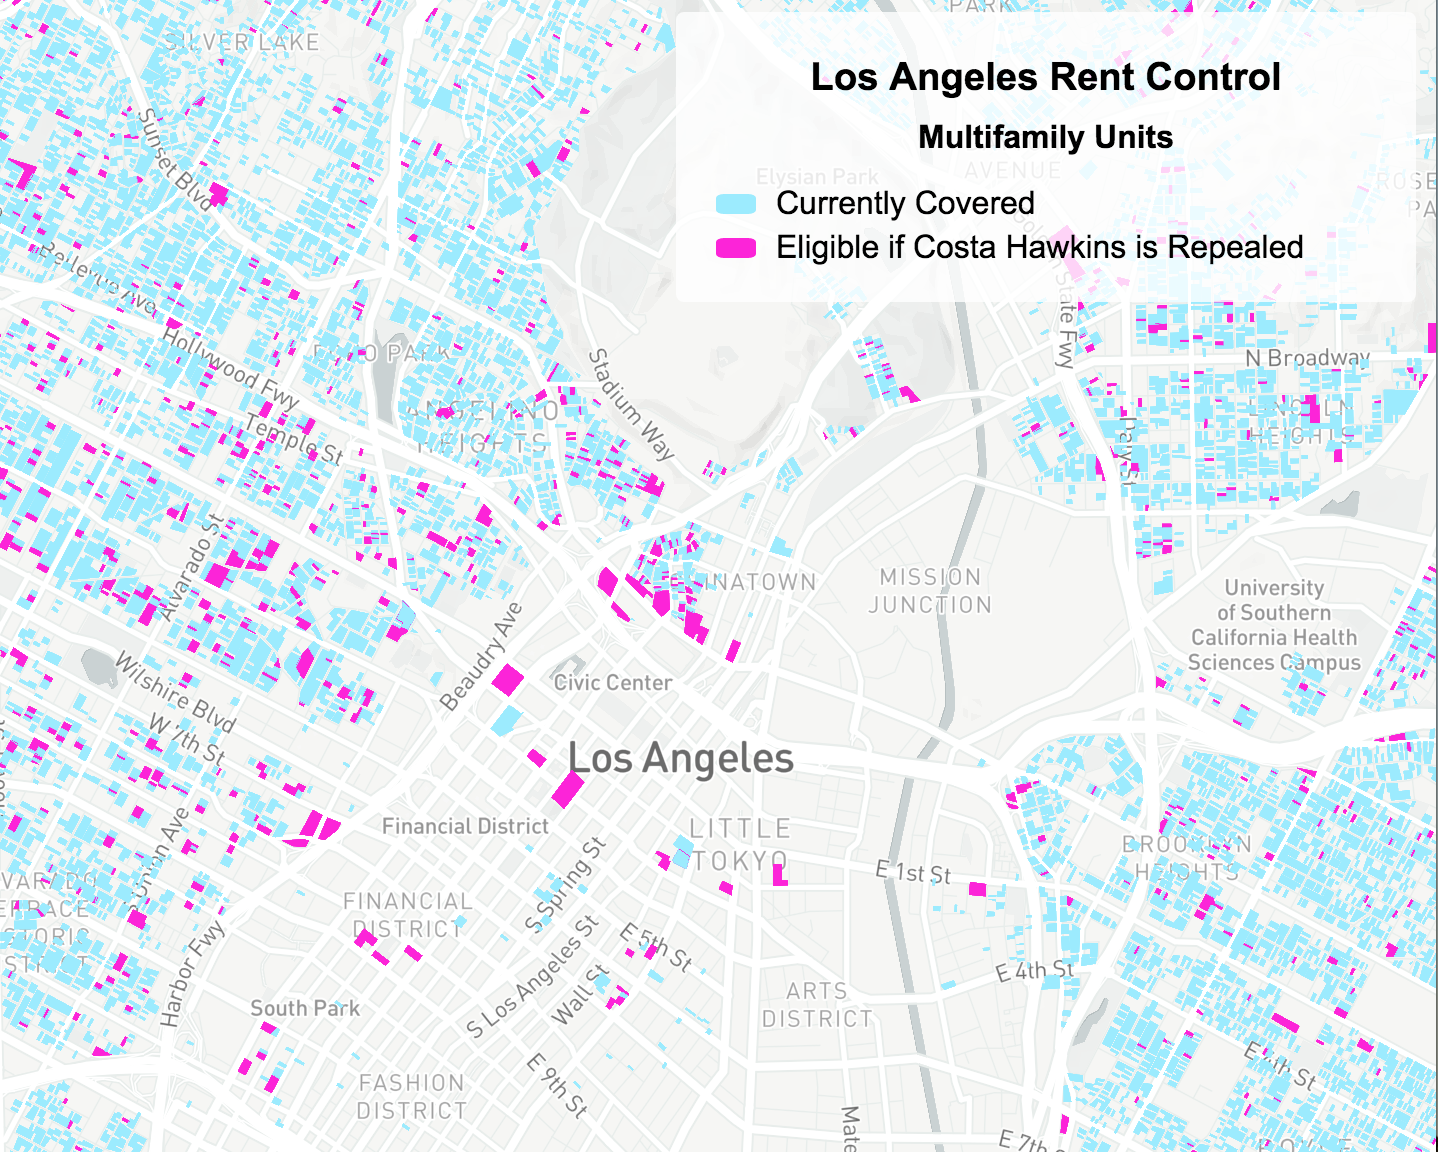 RENT CONTROL FOR ALL